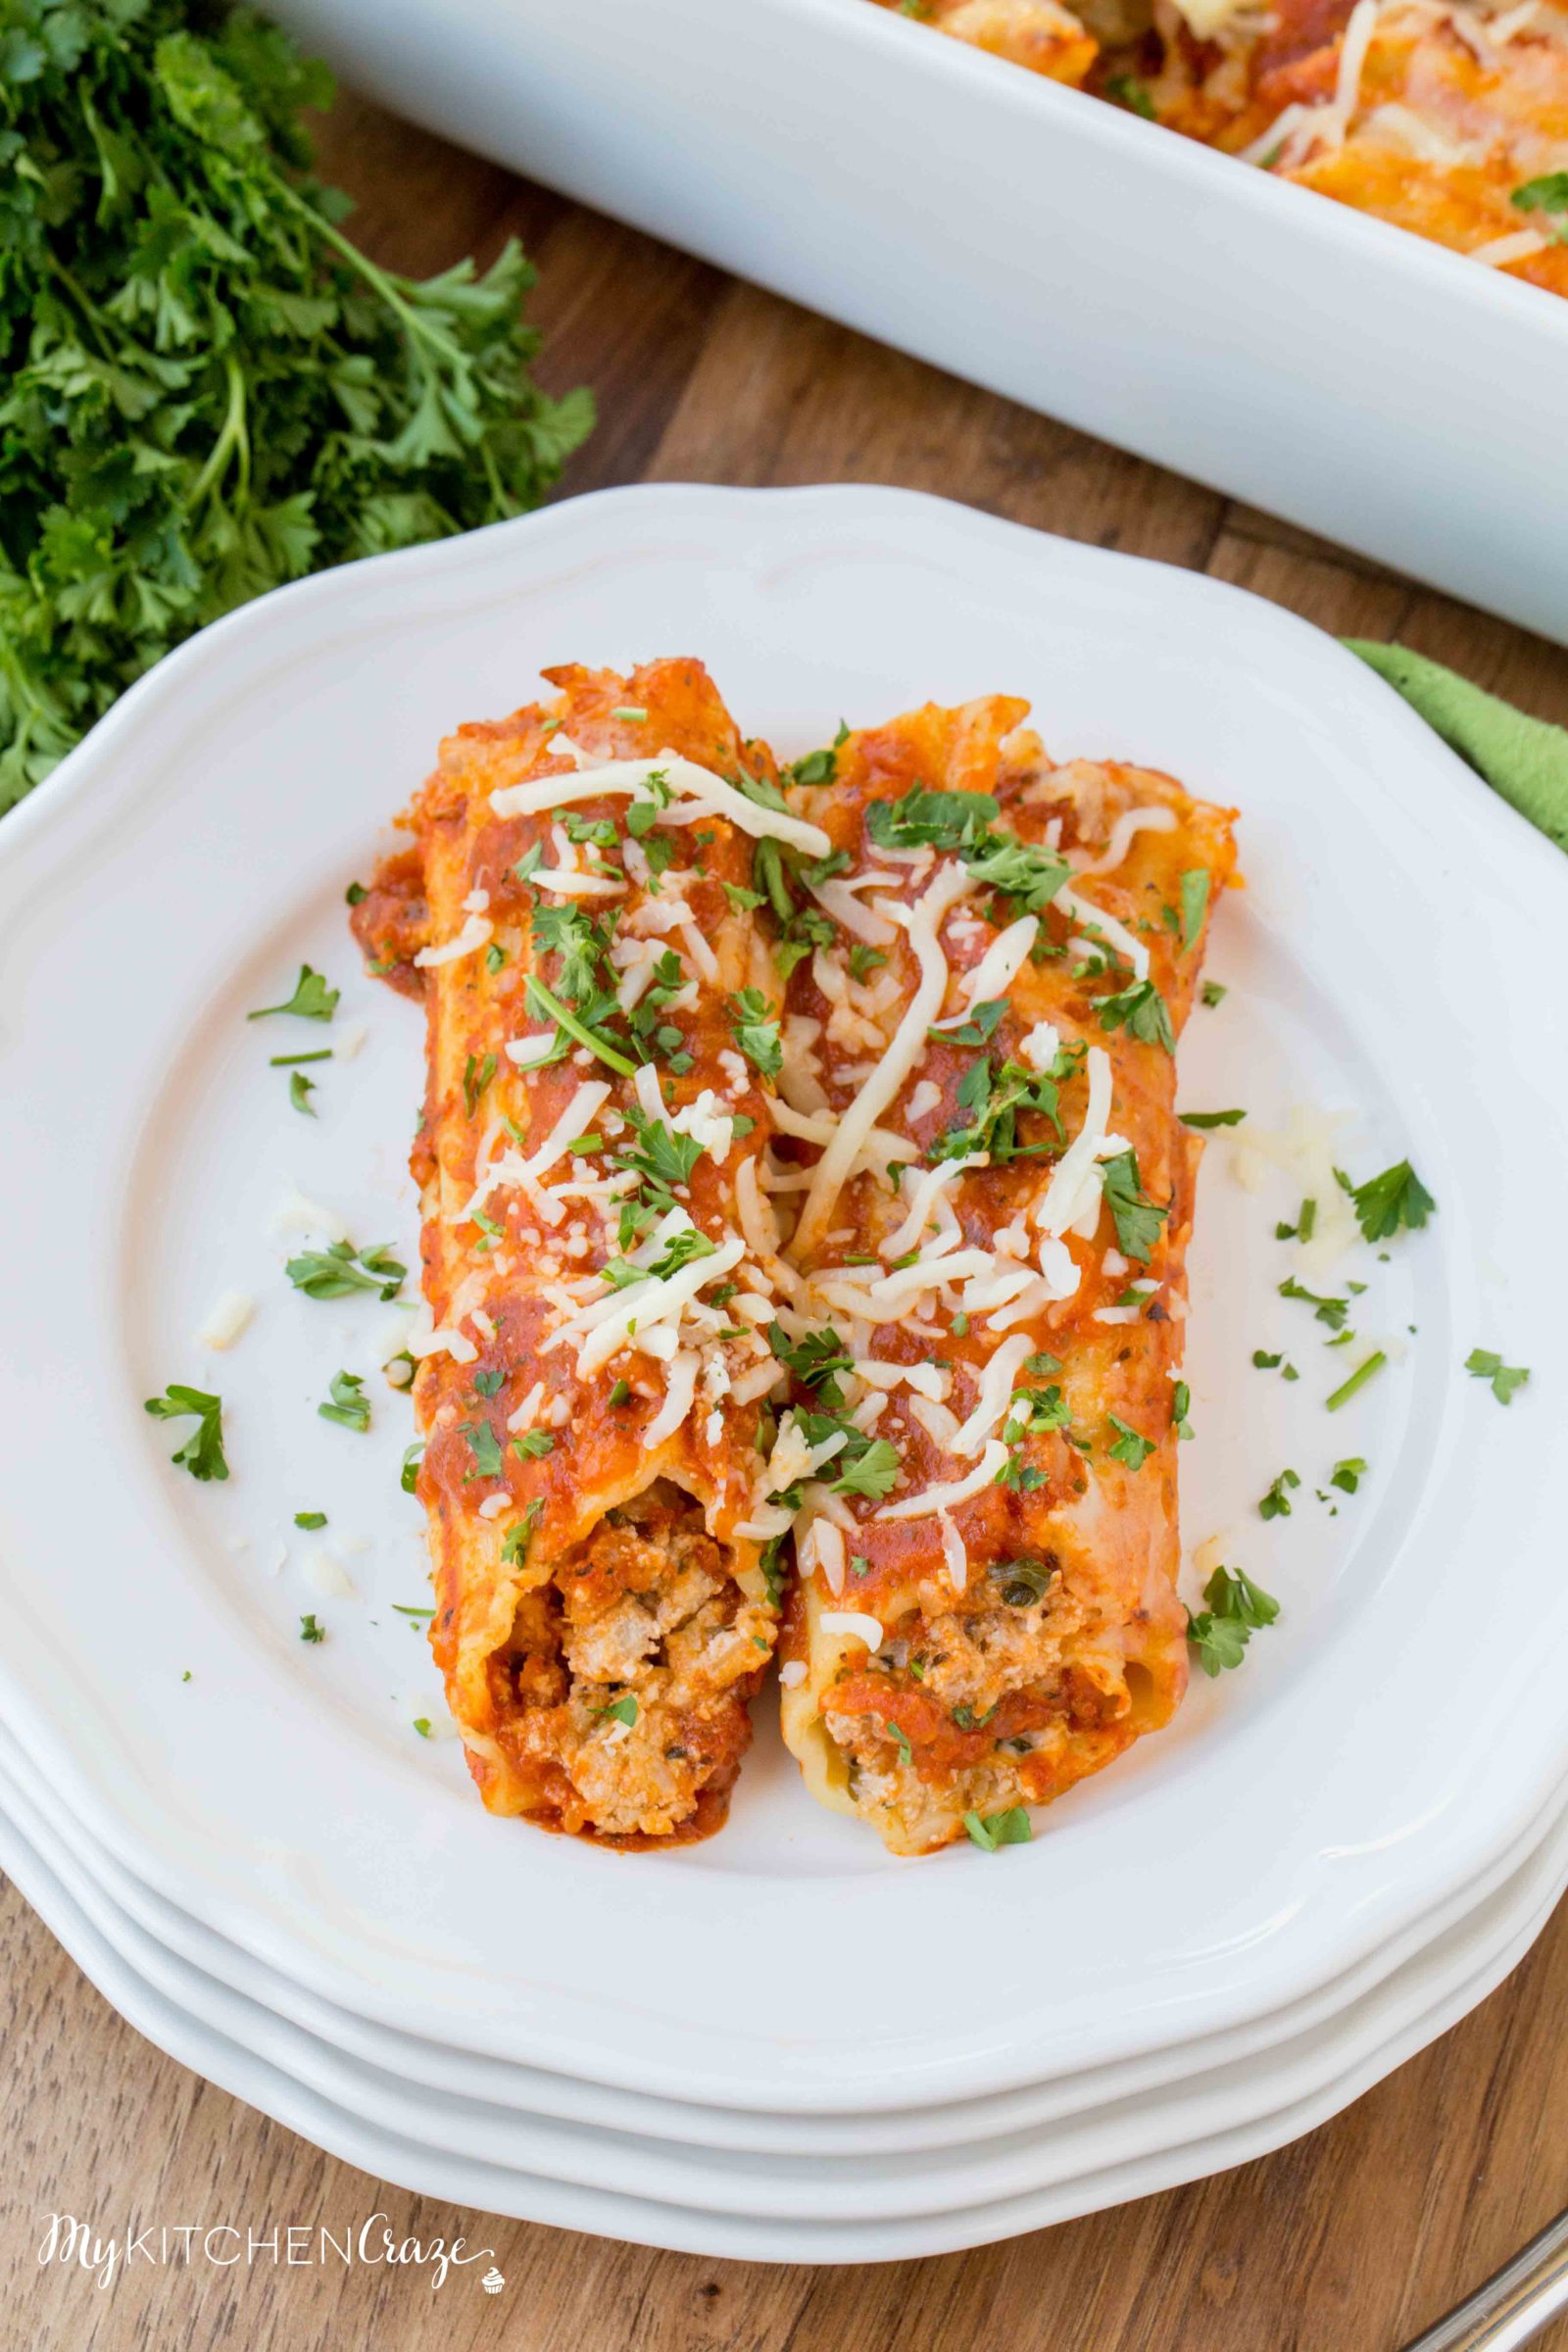 Homemade Manicotti ~ mykitchencraze.com ~ Enjoy this delicious homemade manicotti right at your own dinner table. It’s a perfect recipe for a potluck or family gathering.